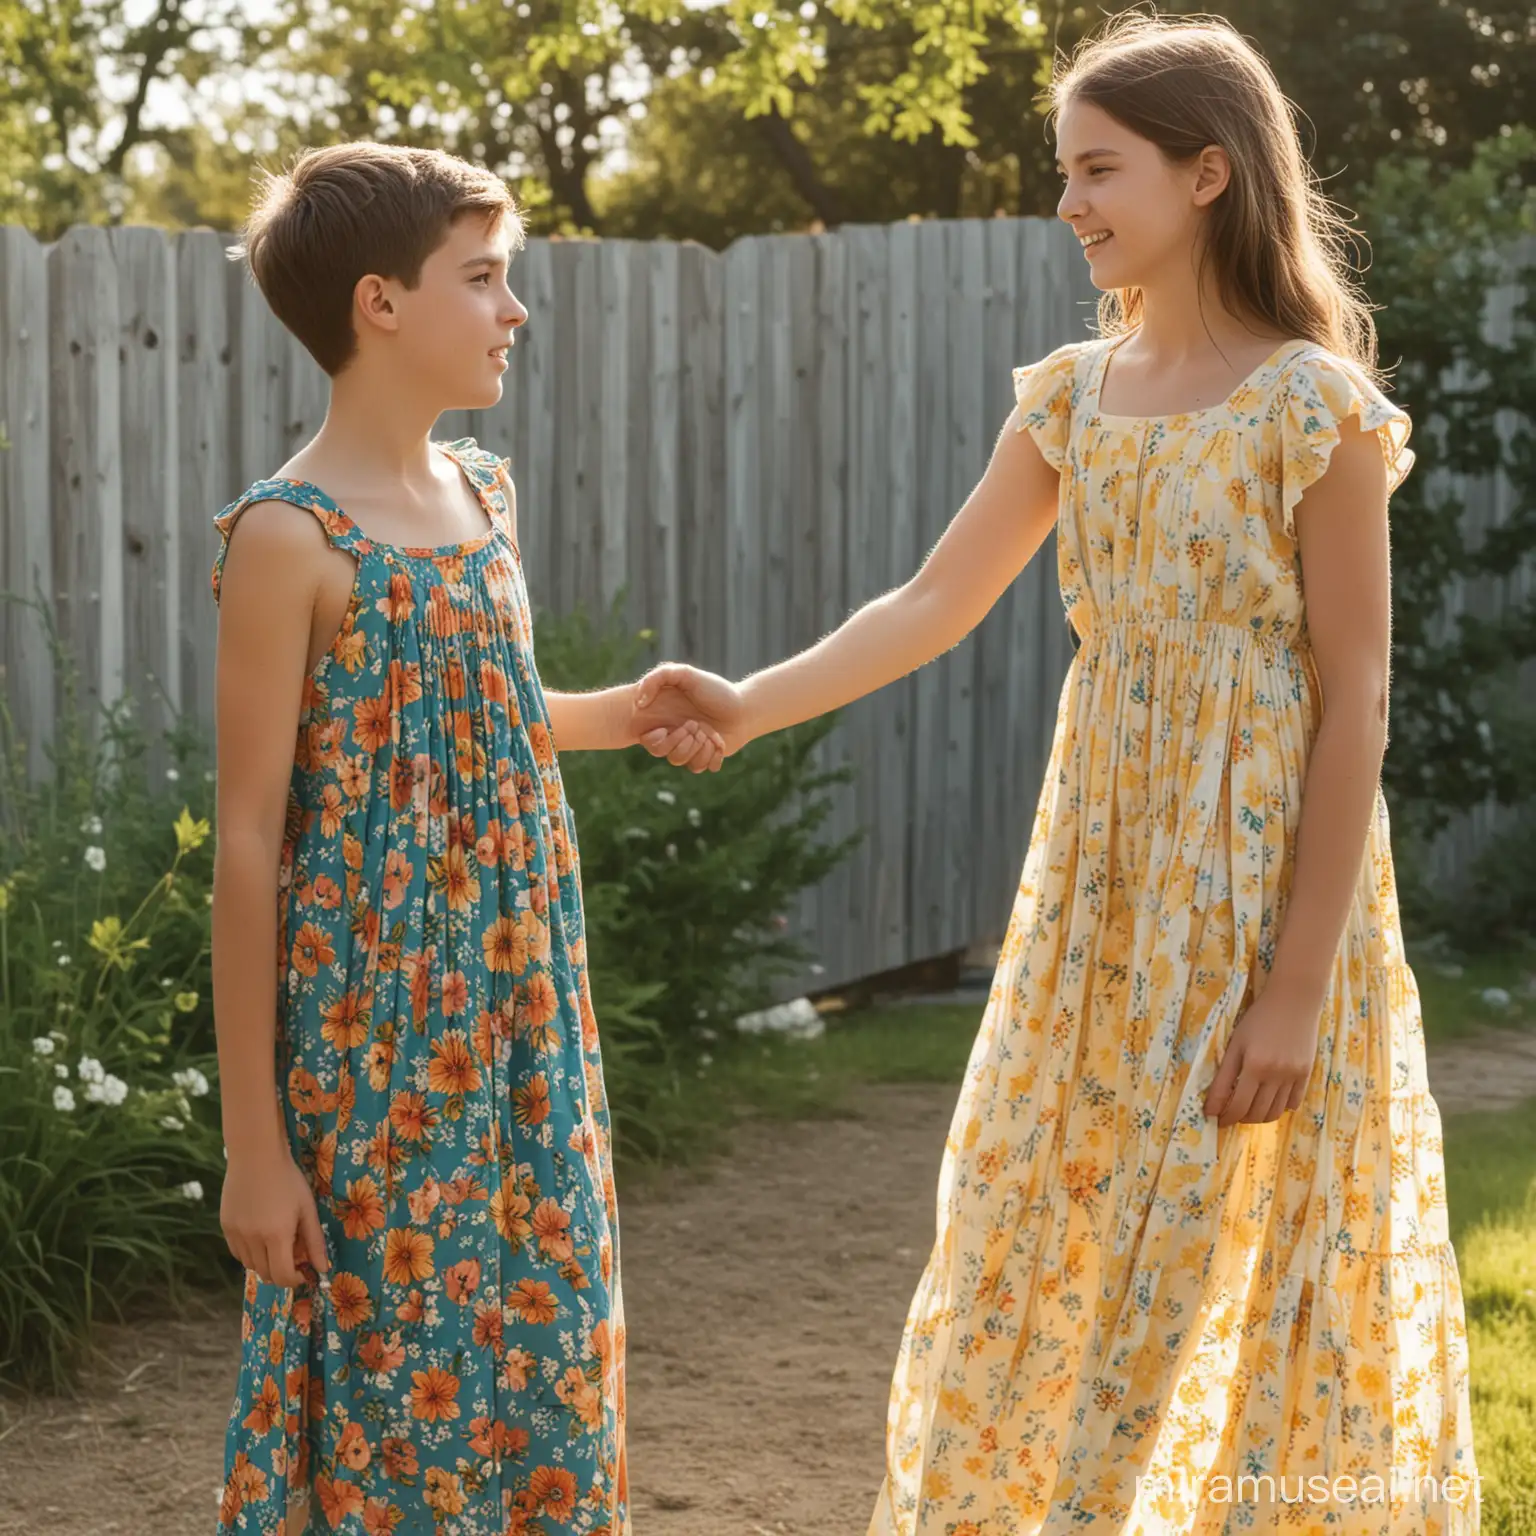 teenage boy has to wear a long summer dress outside for his older sister